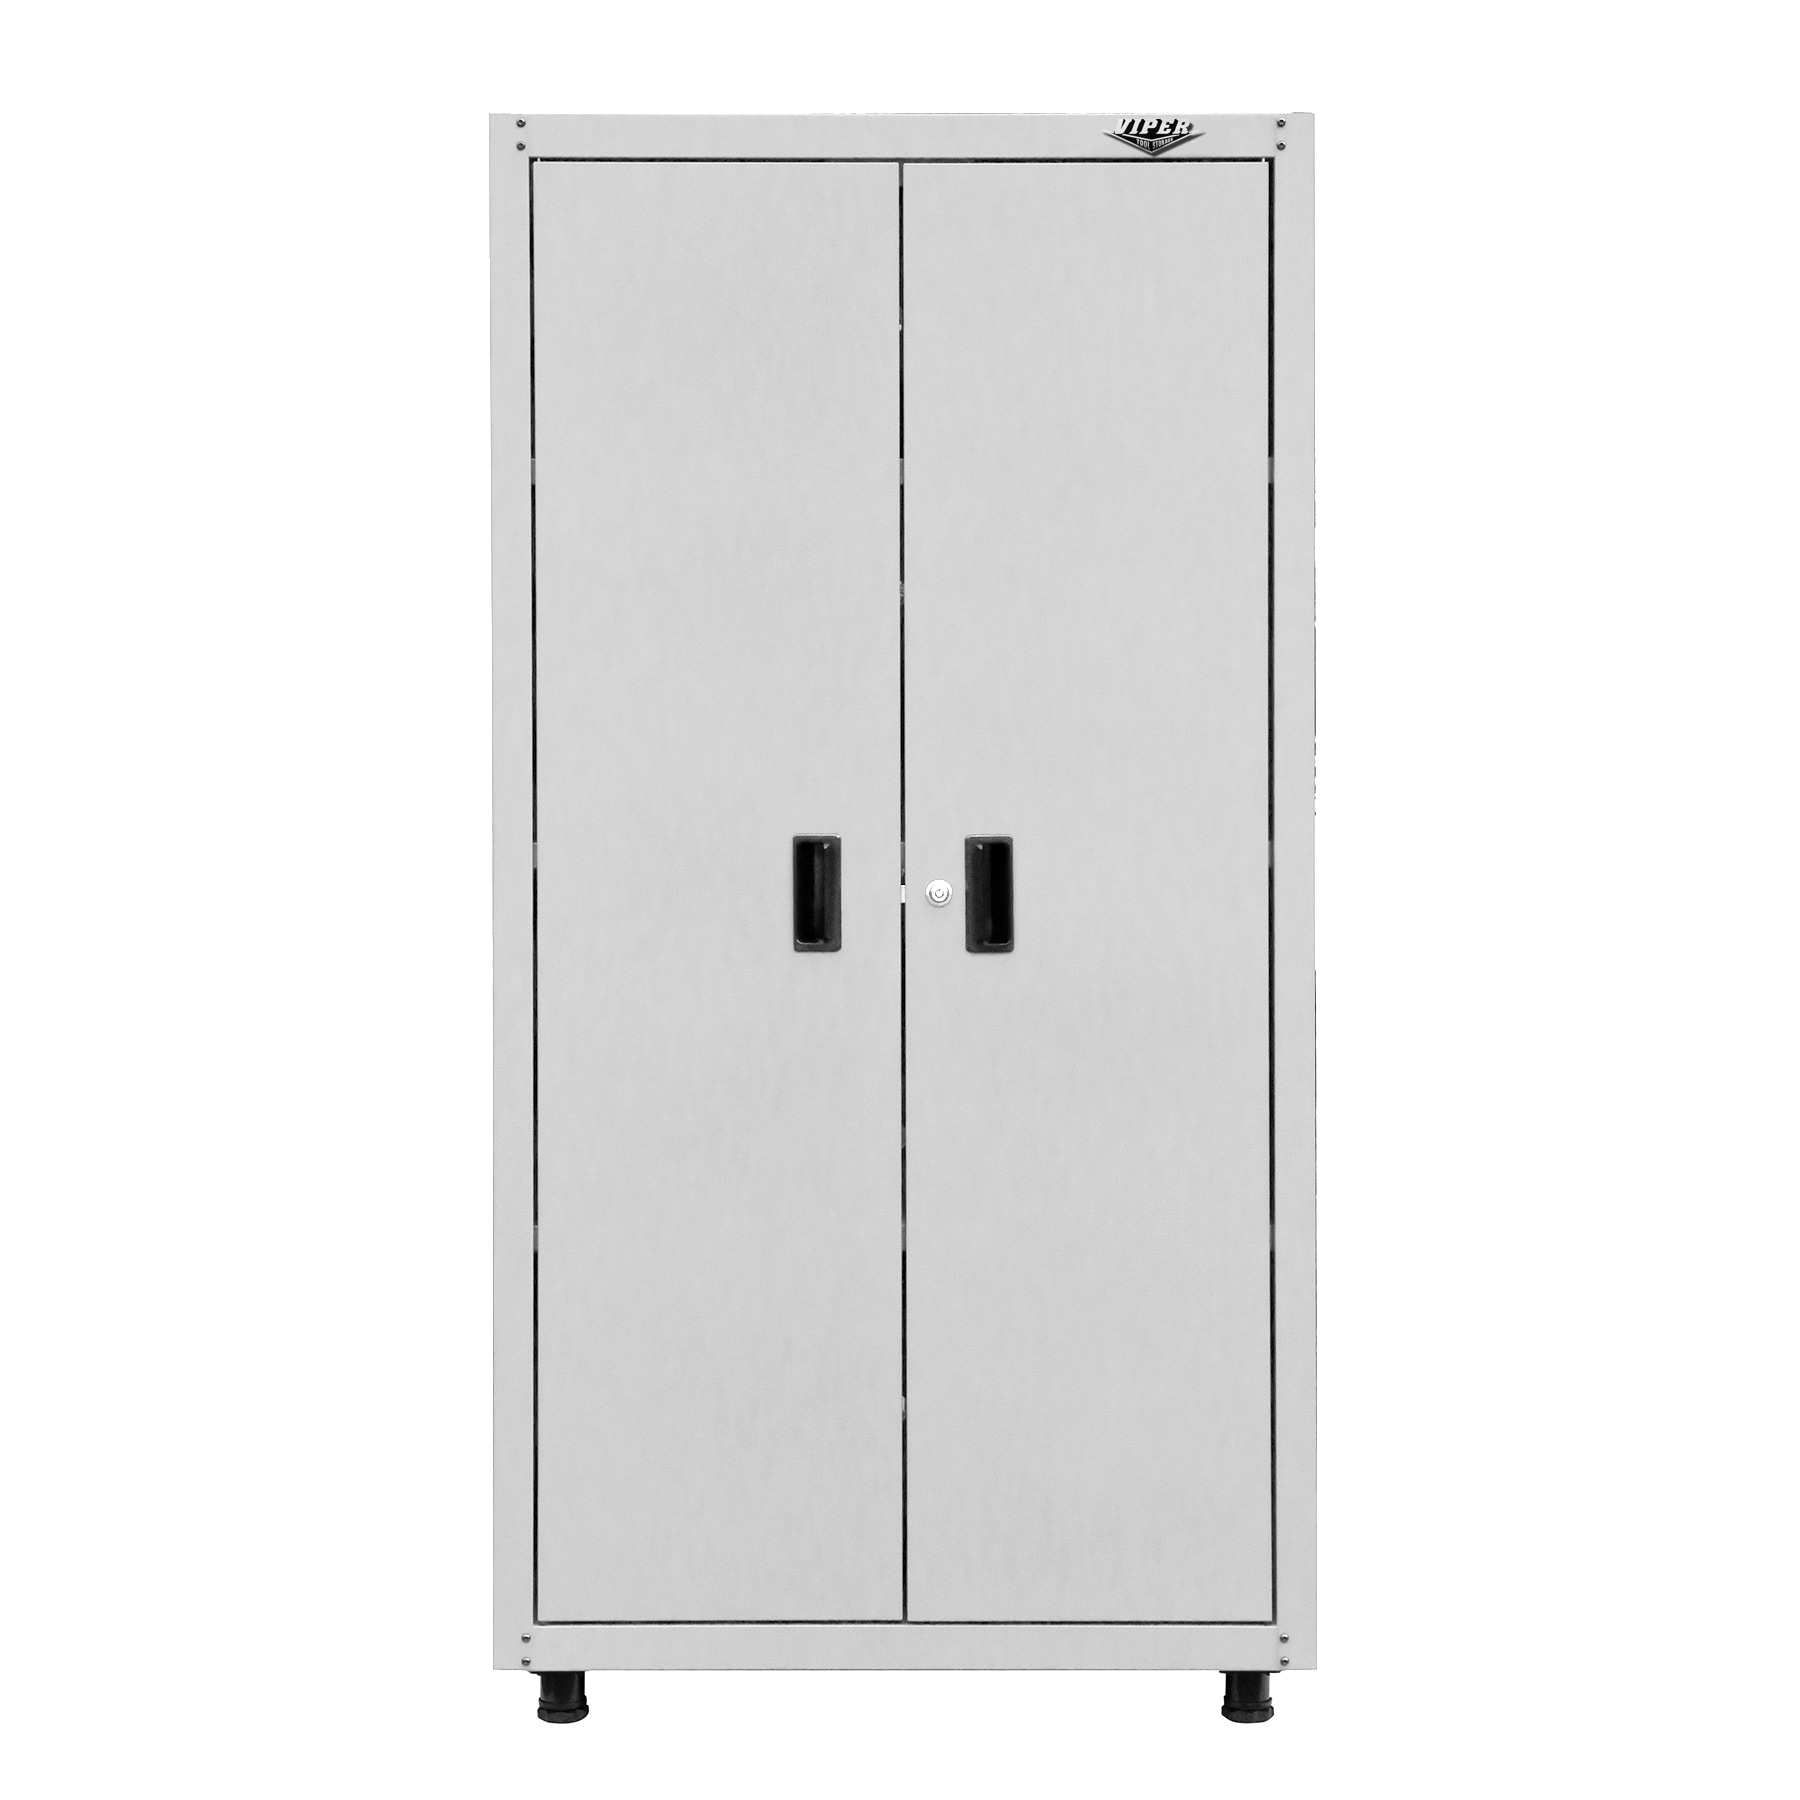 Keter 34-in W x 71-in H x 17-in D Plastic Freestanding Utility Storage Cabinet 